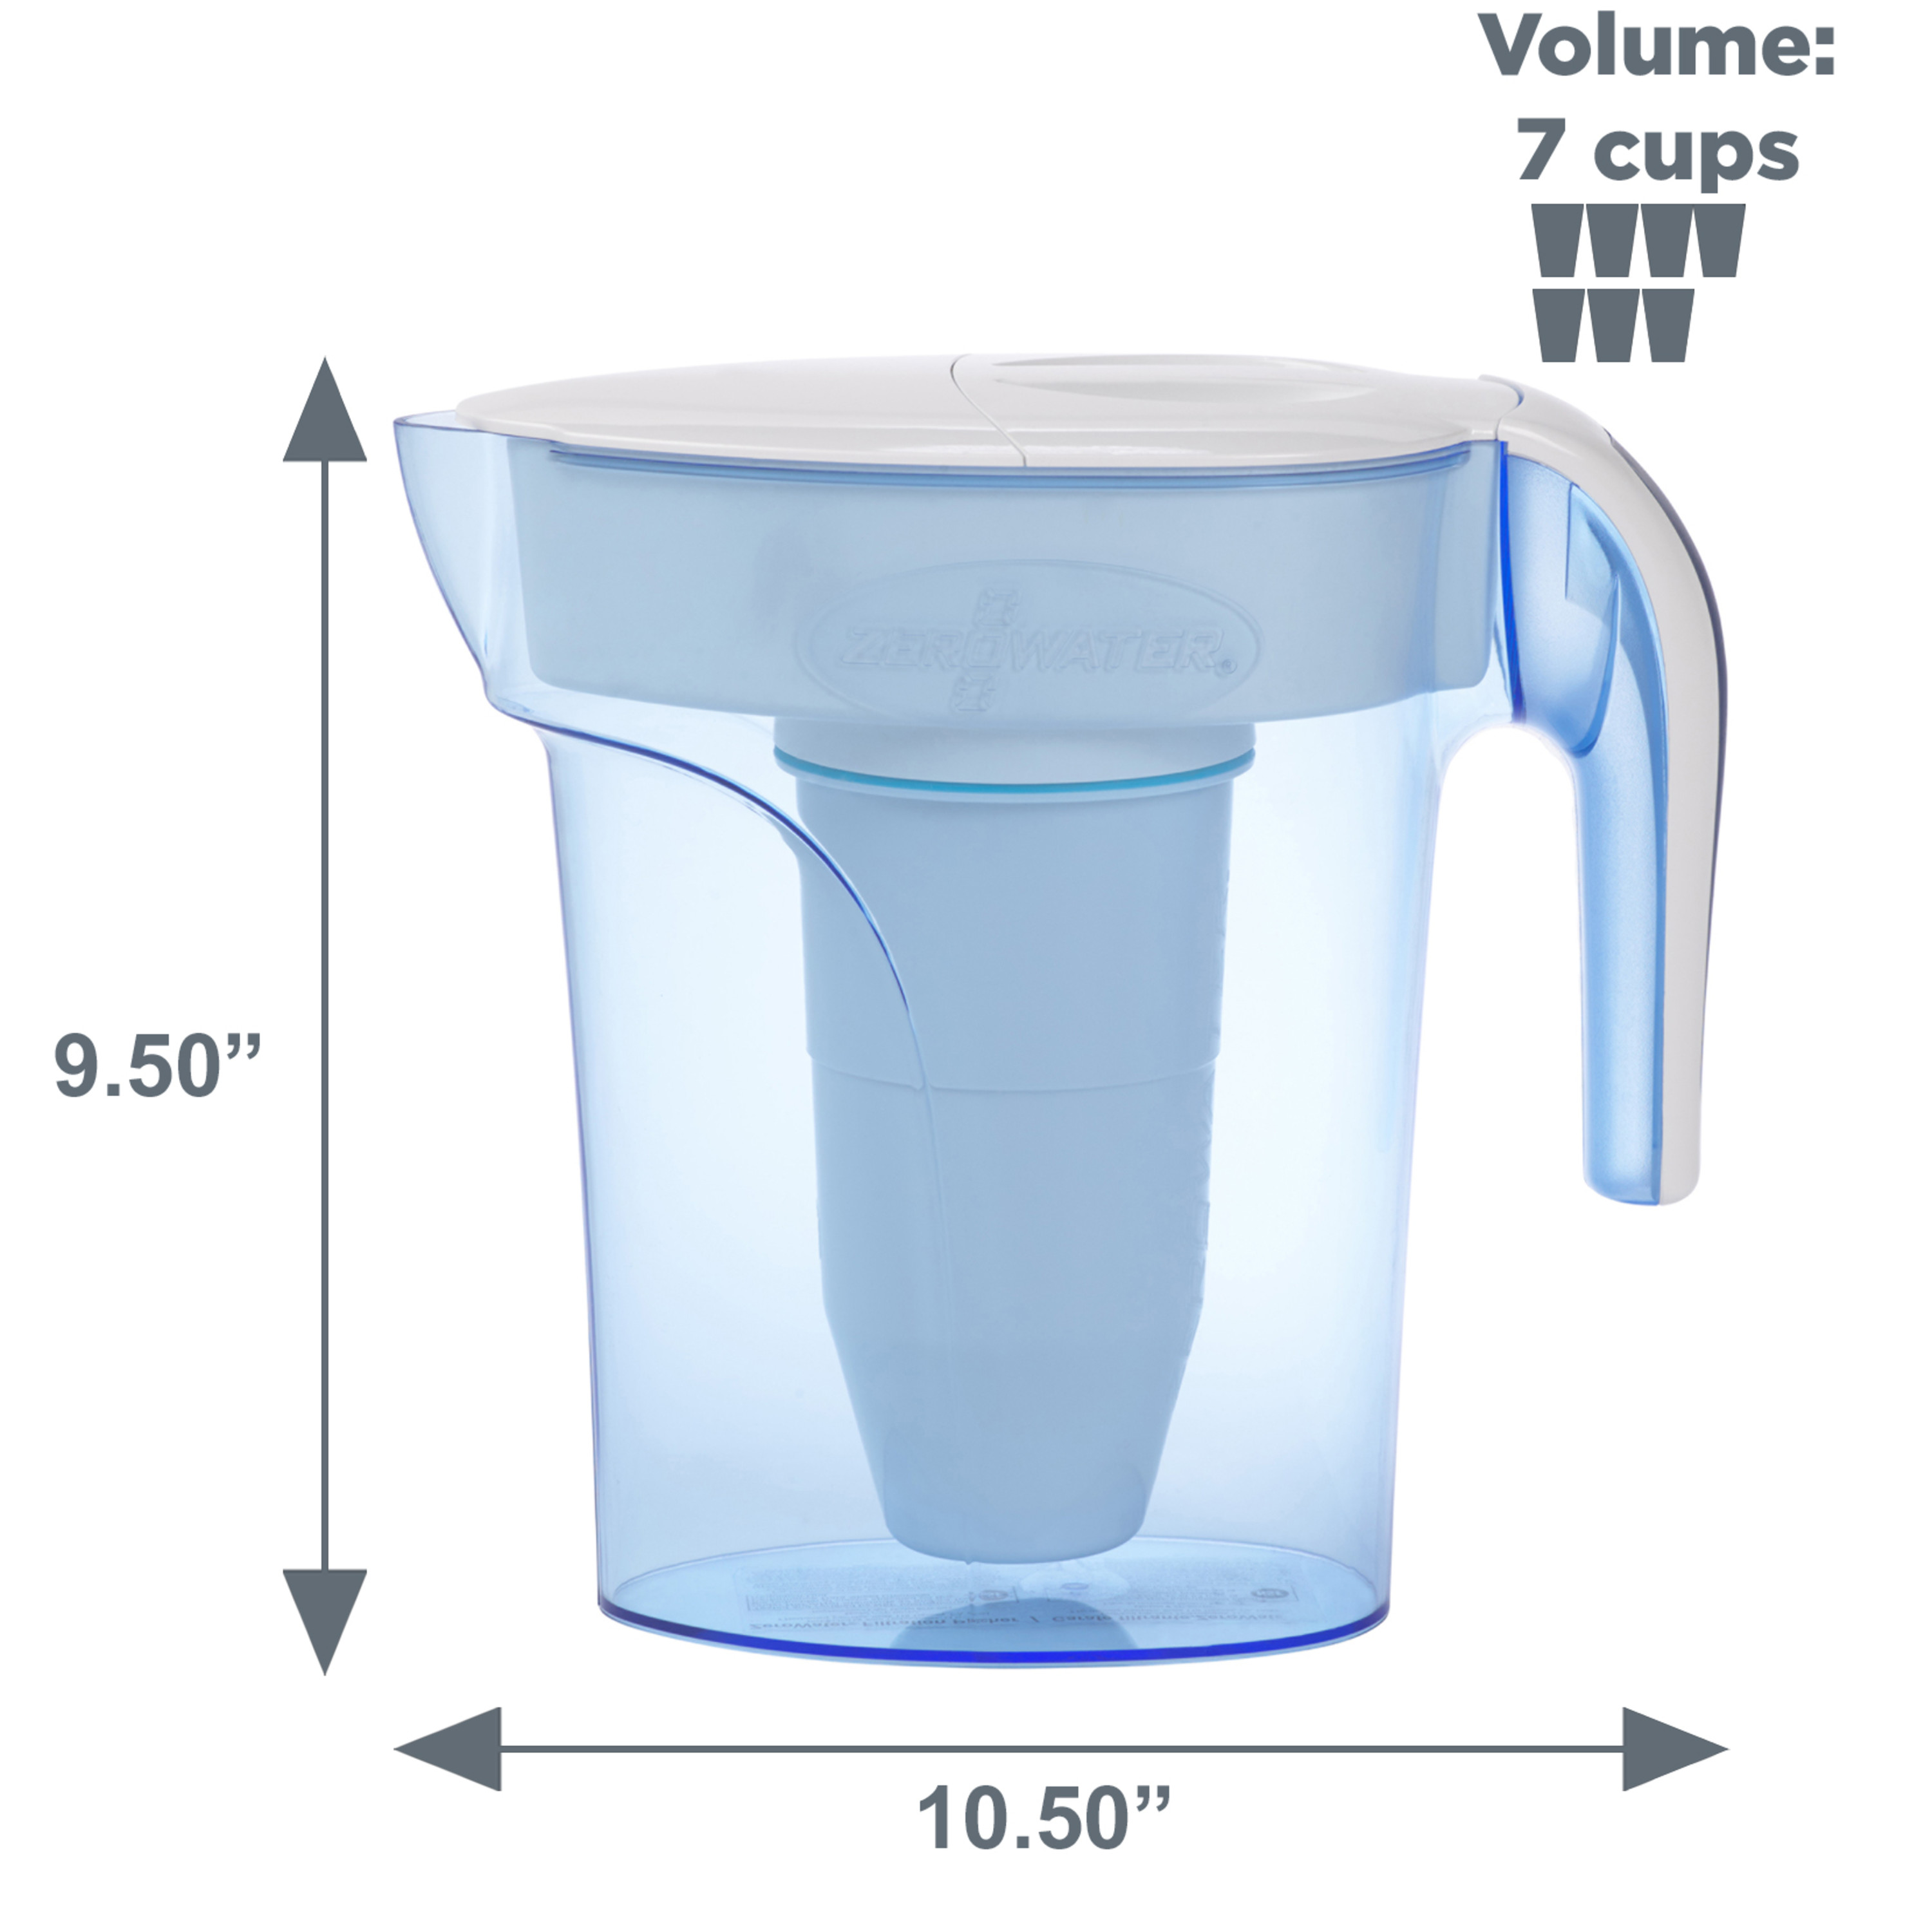 Zerowater 7 Cup 5-Stage Ready-Pour™ Pitcher - image 3 of 6